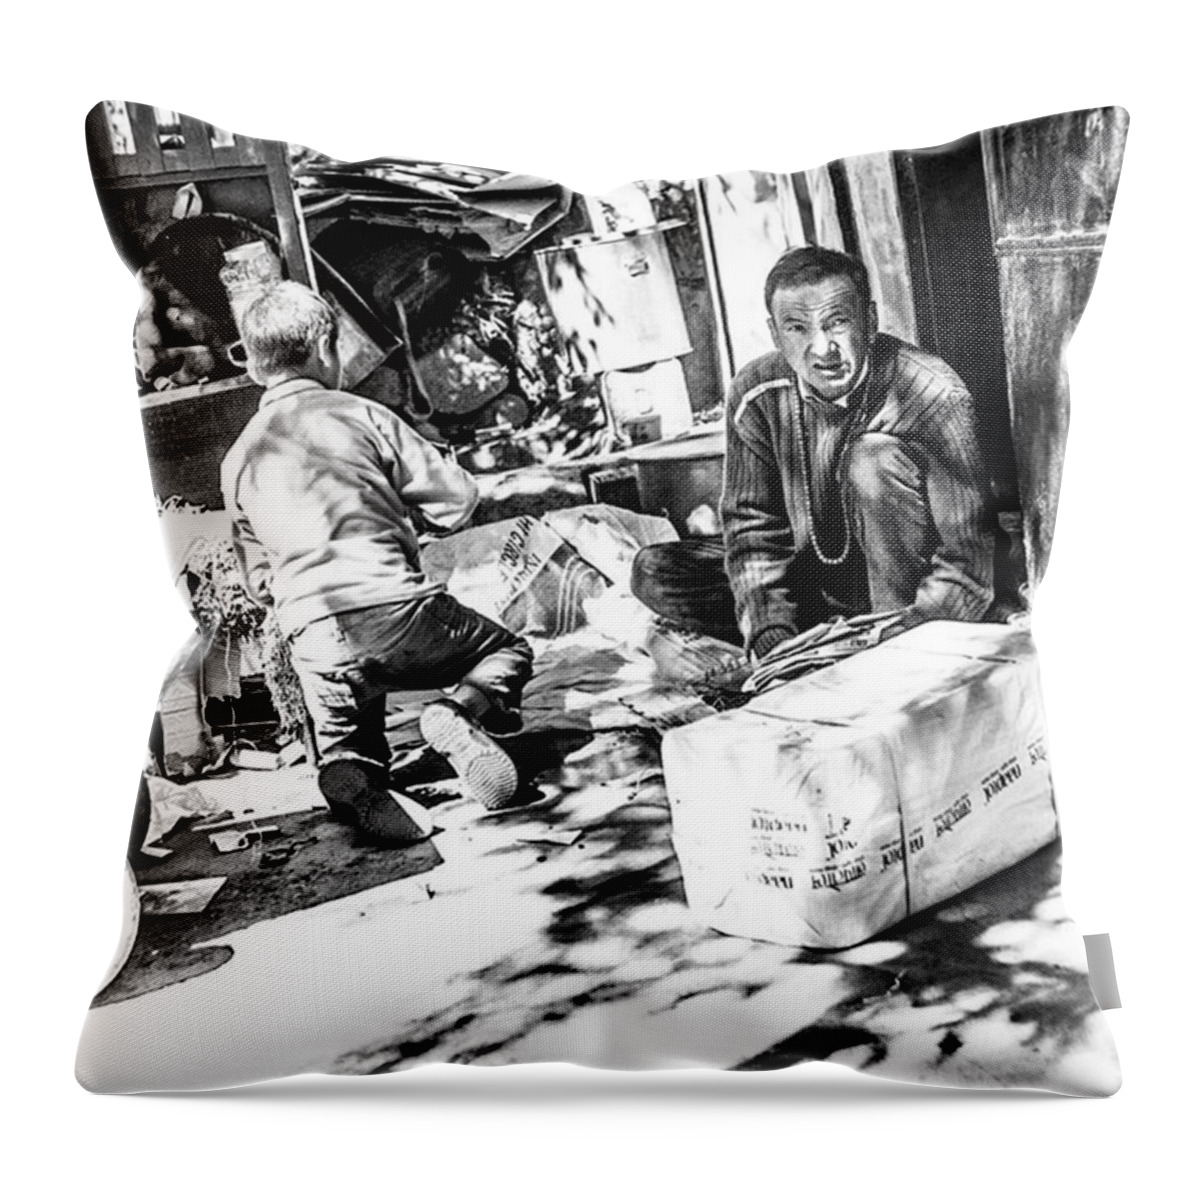 Busy Throw Pillow featuring the photograph Manual Labour by Aleck Cartwright